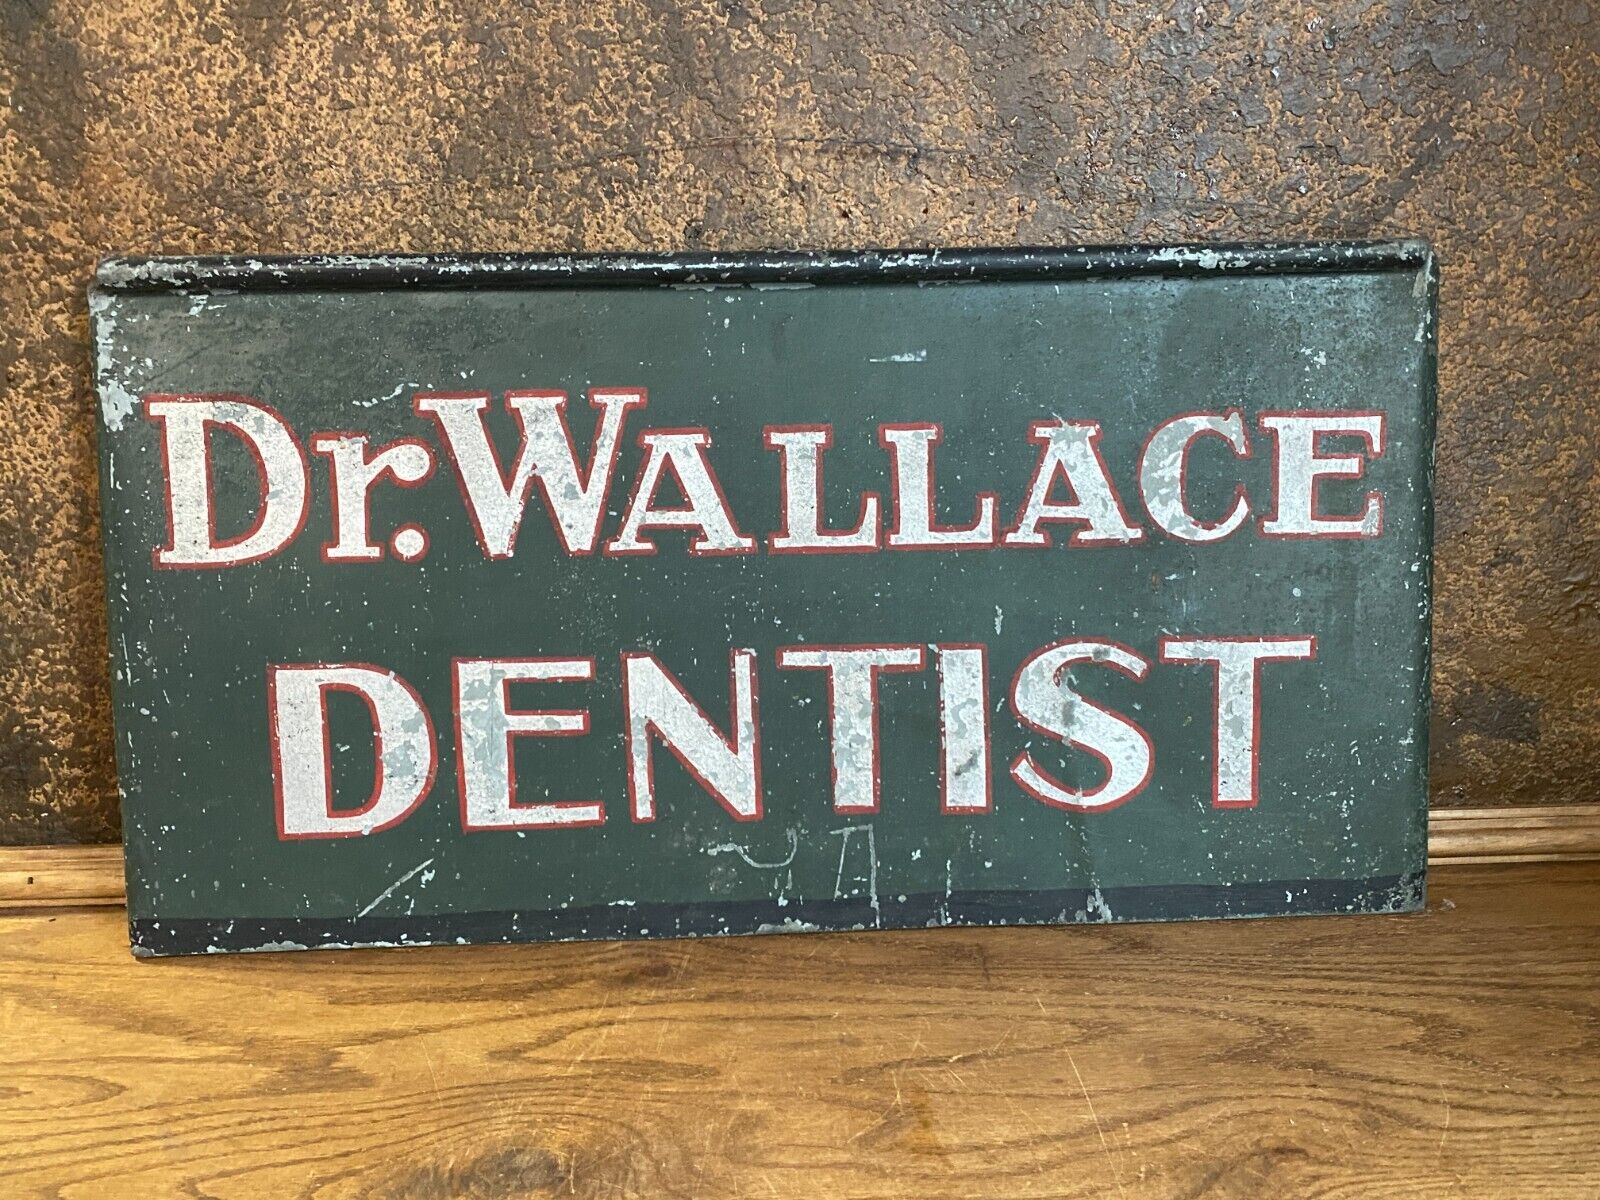 Early Original Antique DENTIST Trade Sign Painted Metal  ~ Vintage Dr Wallace